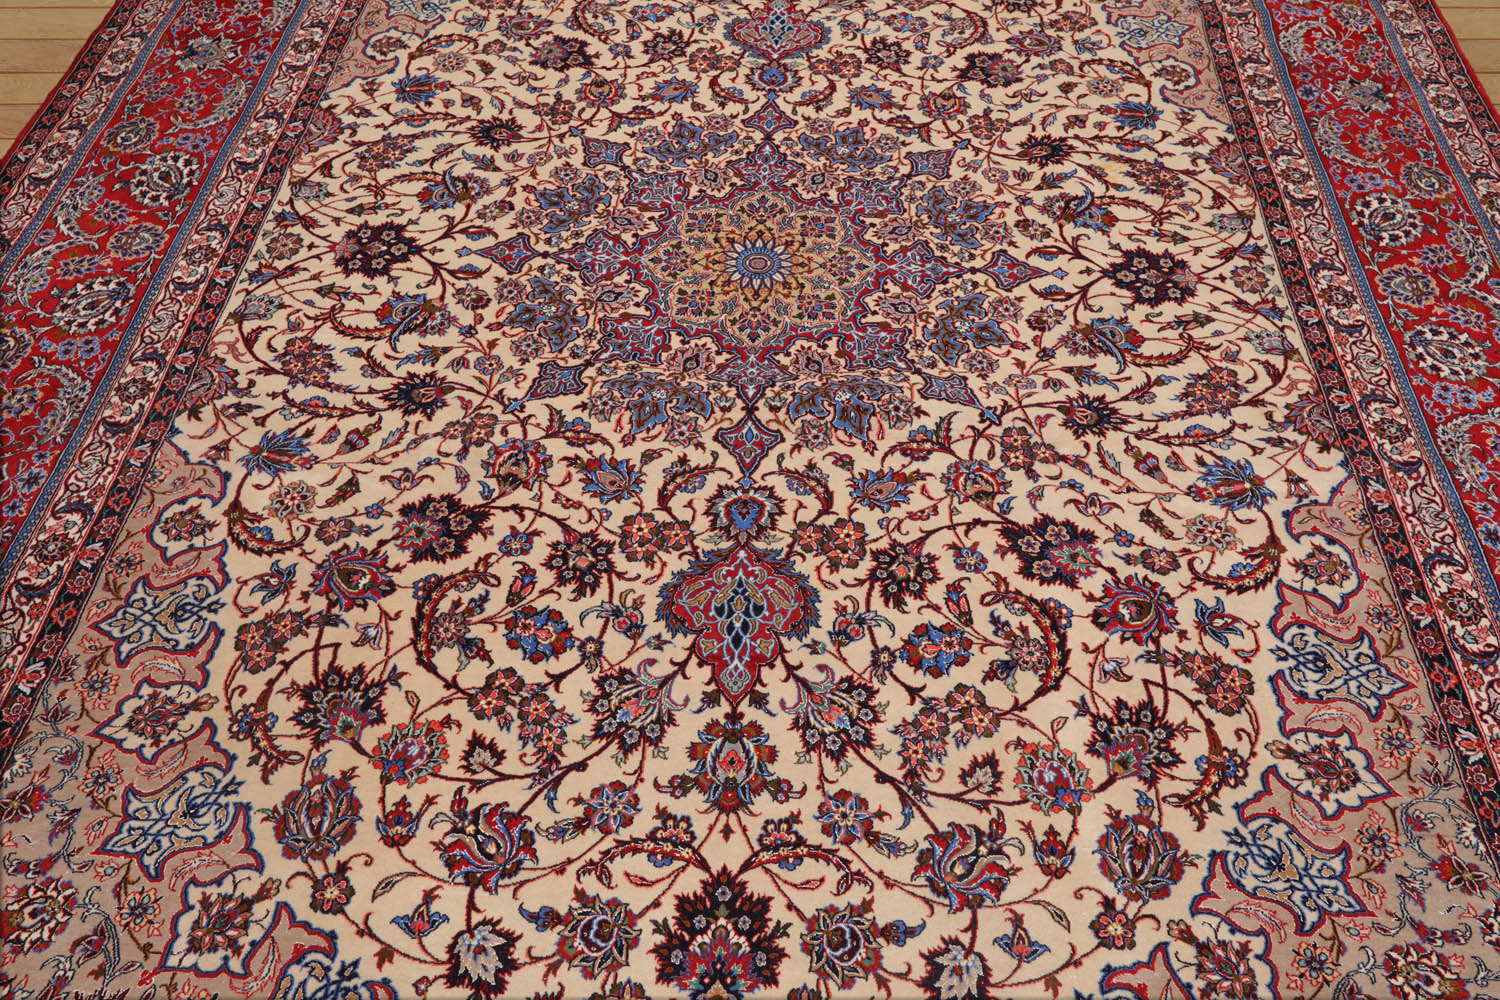 Slatington 9x12 Hand Knotted Wool and Silk Traditional Isfahan 300 KPSI Oriental Area Rug Ivory, Red Color